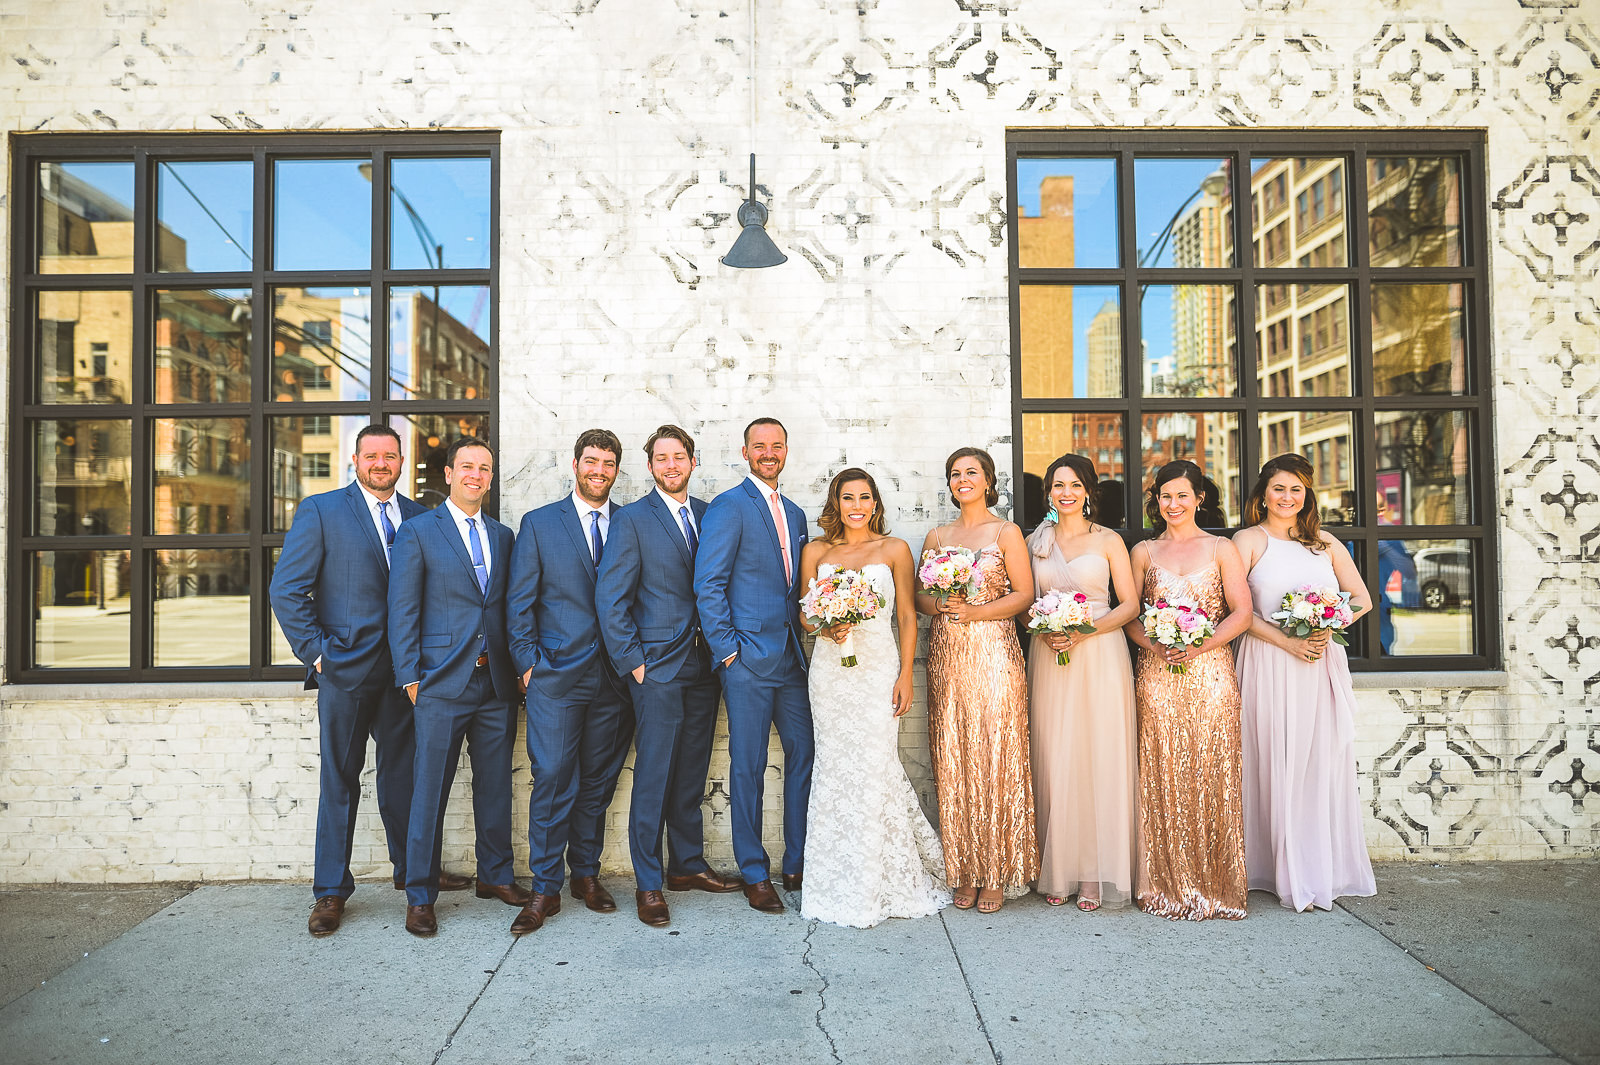 23 bridal party - Natalie + Alan // Chicago Wedding Photographer at Cafe Brauer